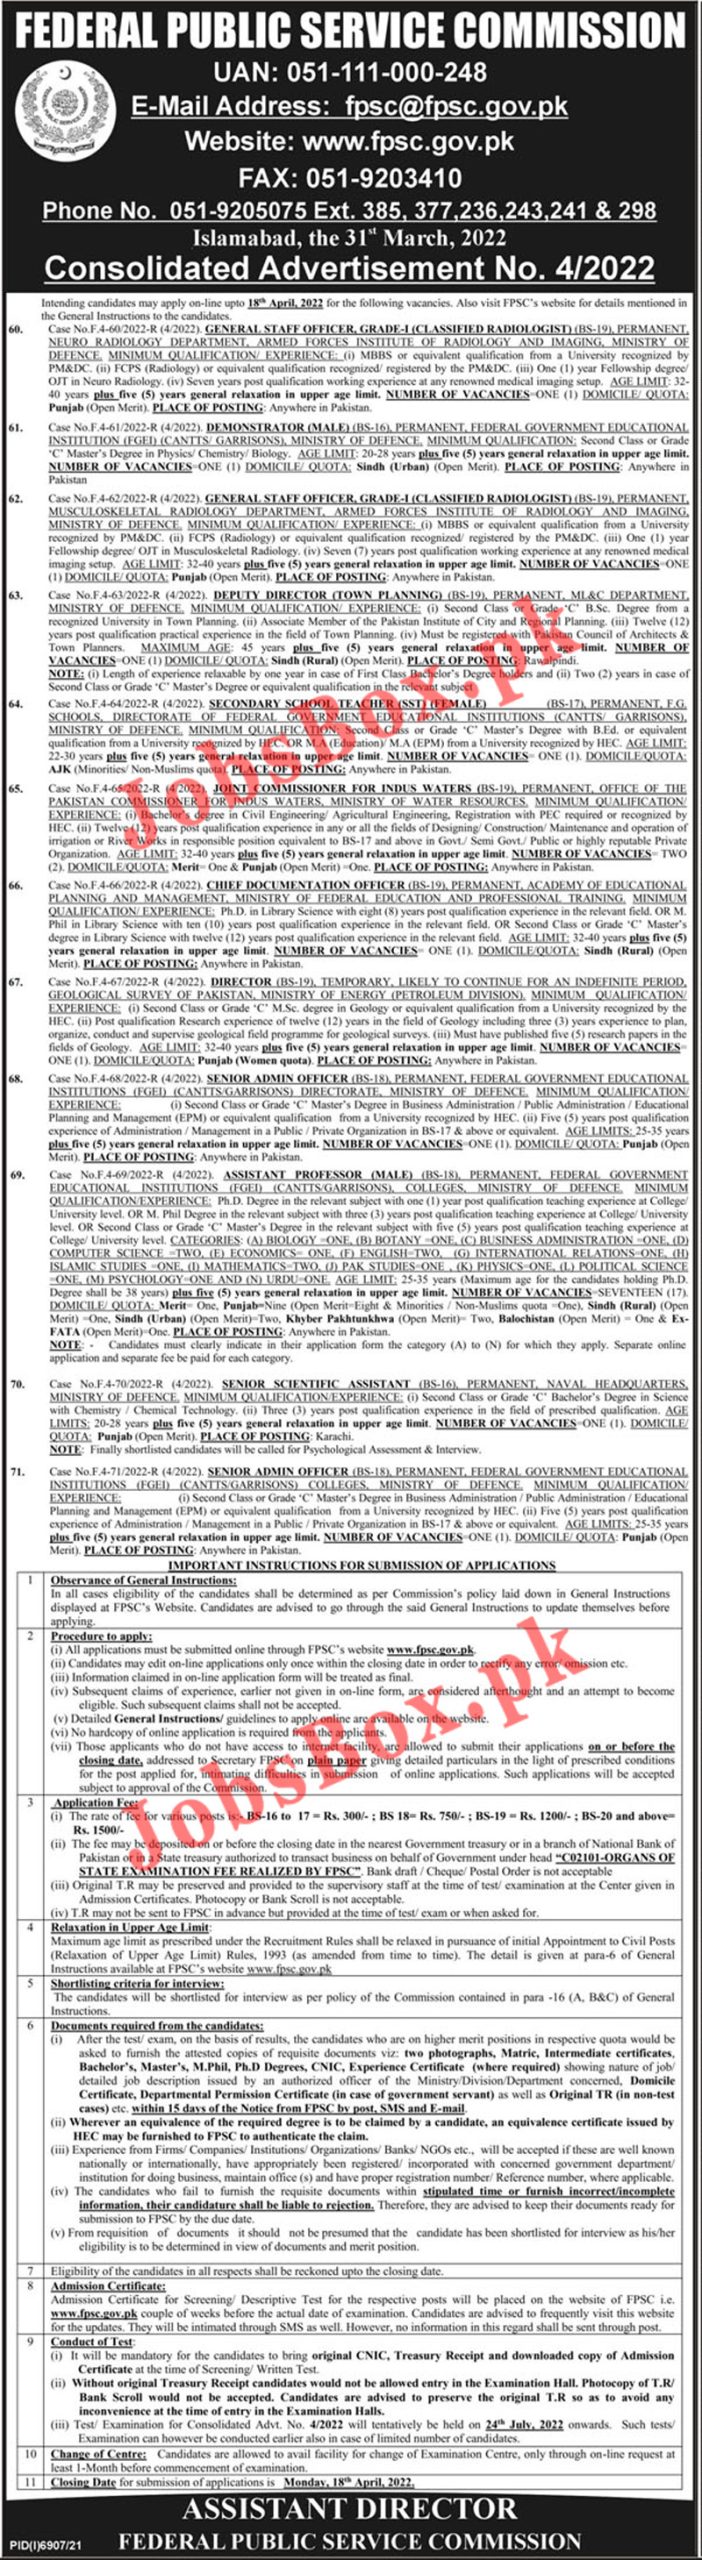 FPSC Jobs 2022 Consolidated Advertisement No. 04/2022